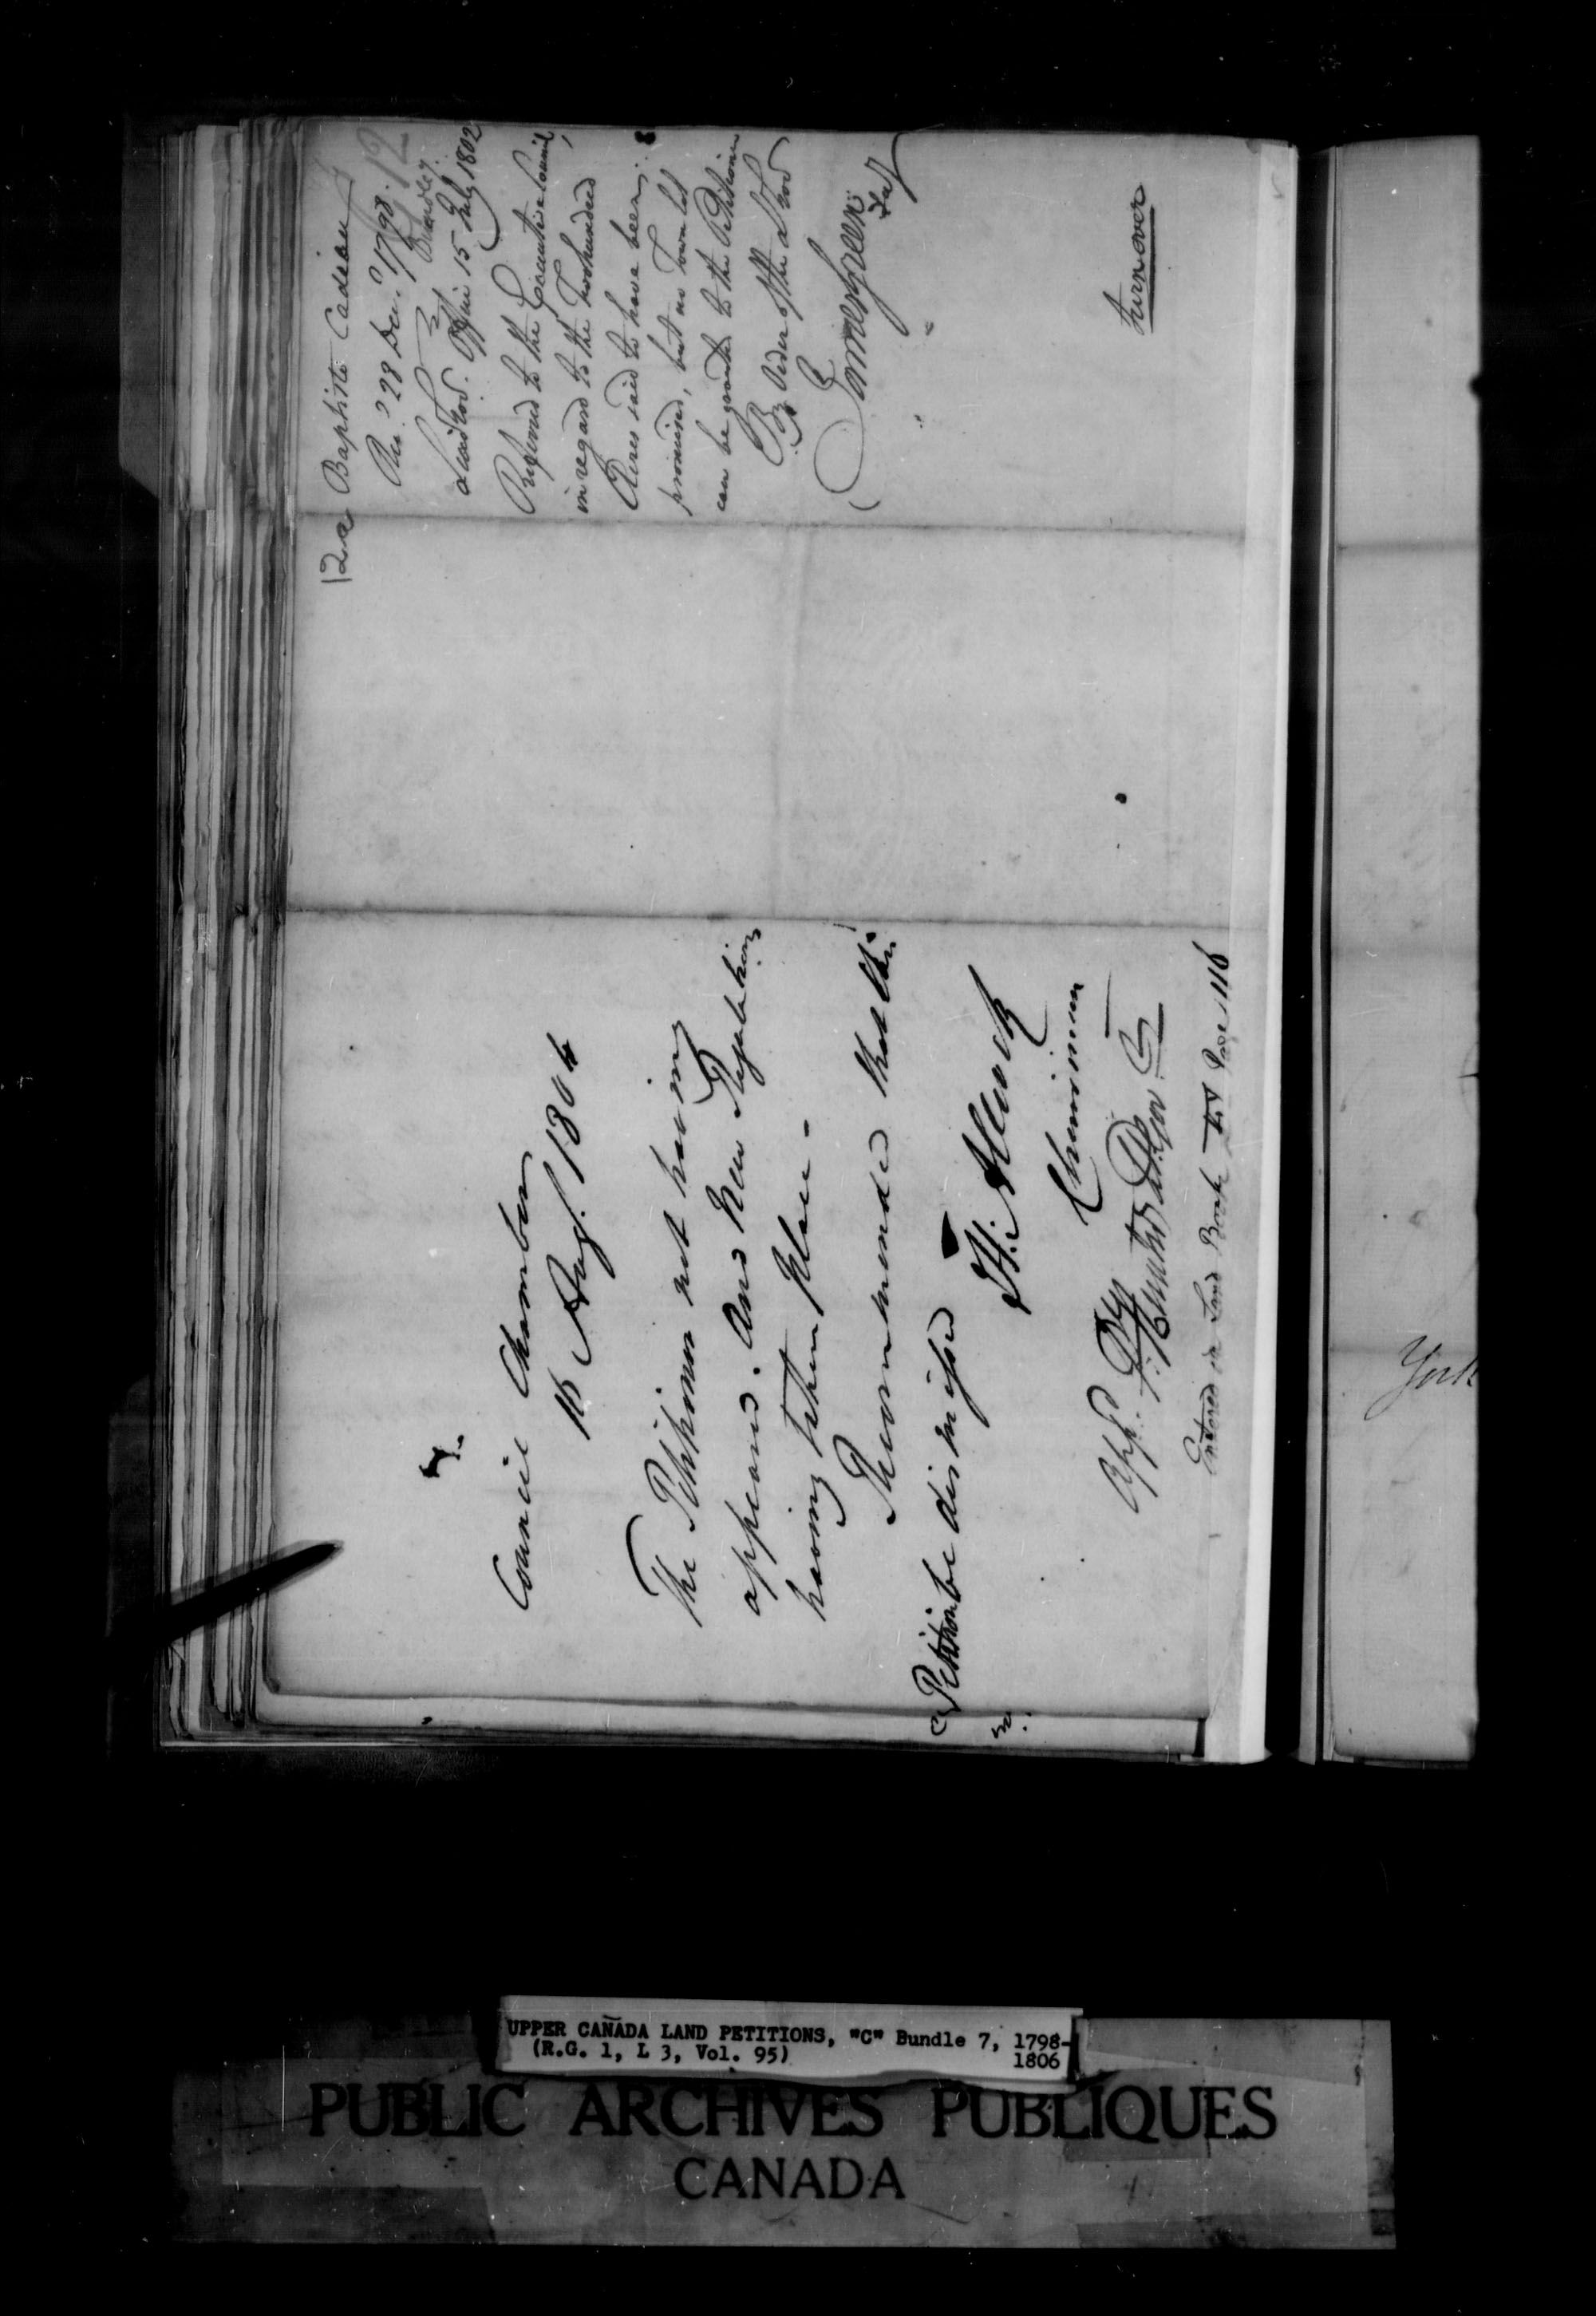 Title: Upper Canada Land Petitions (1763-1865) - Mikan Number: 205131 - Microform: c-1649